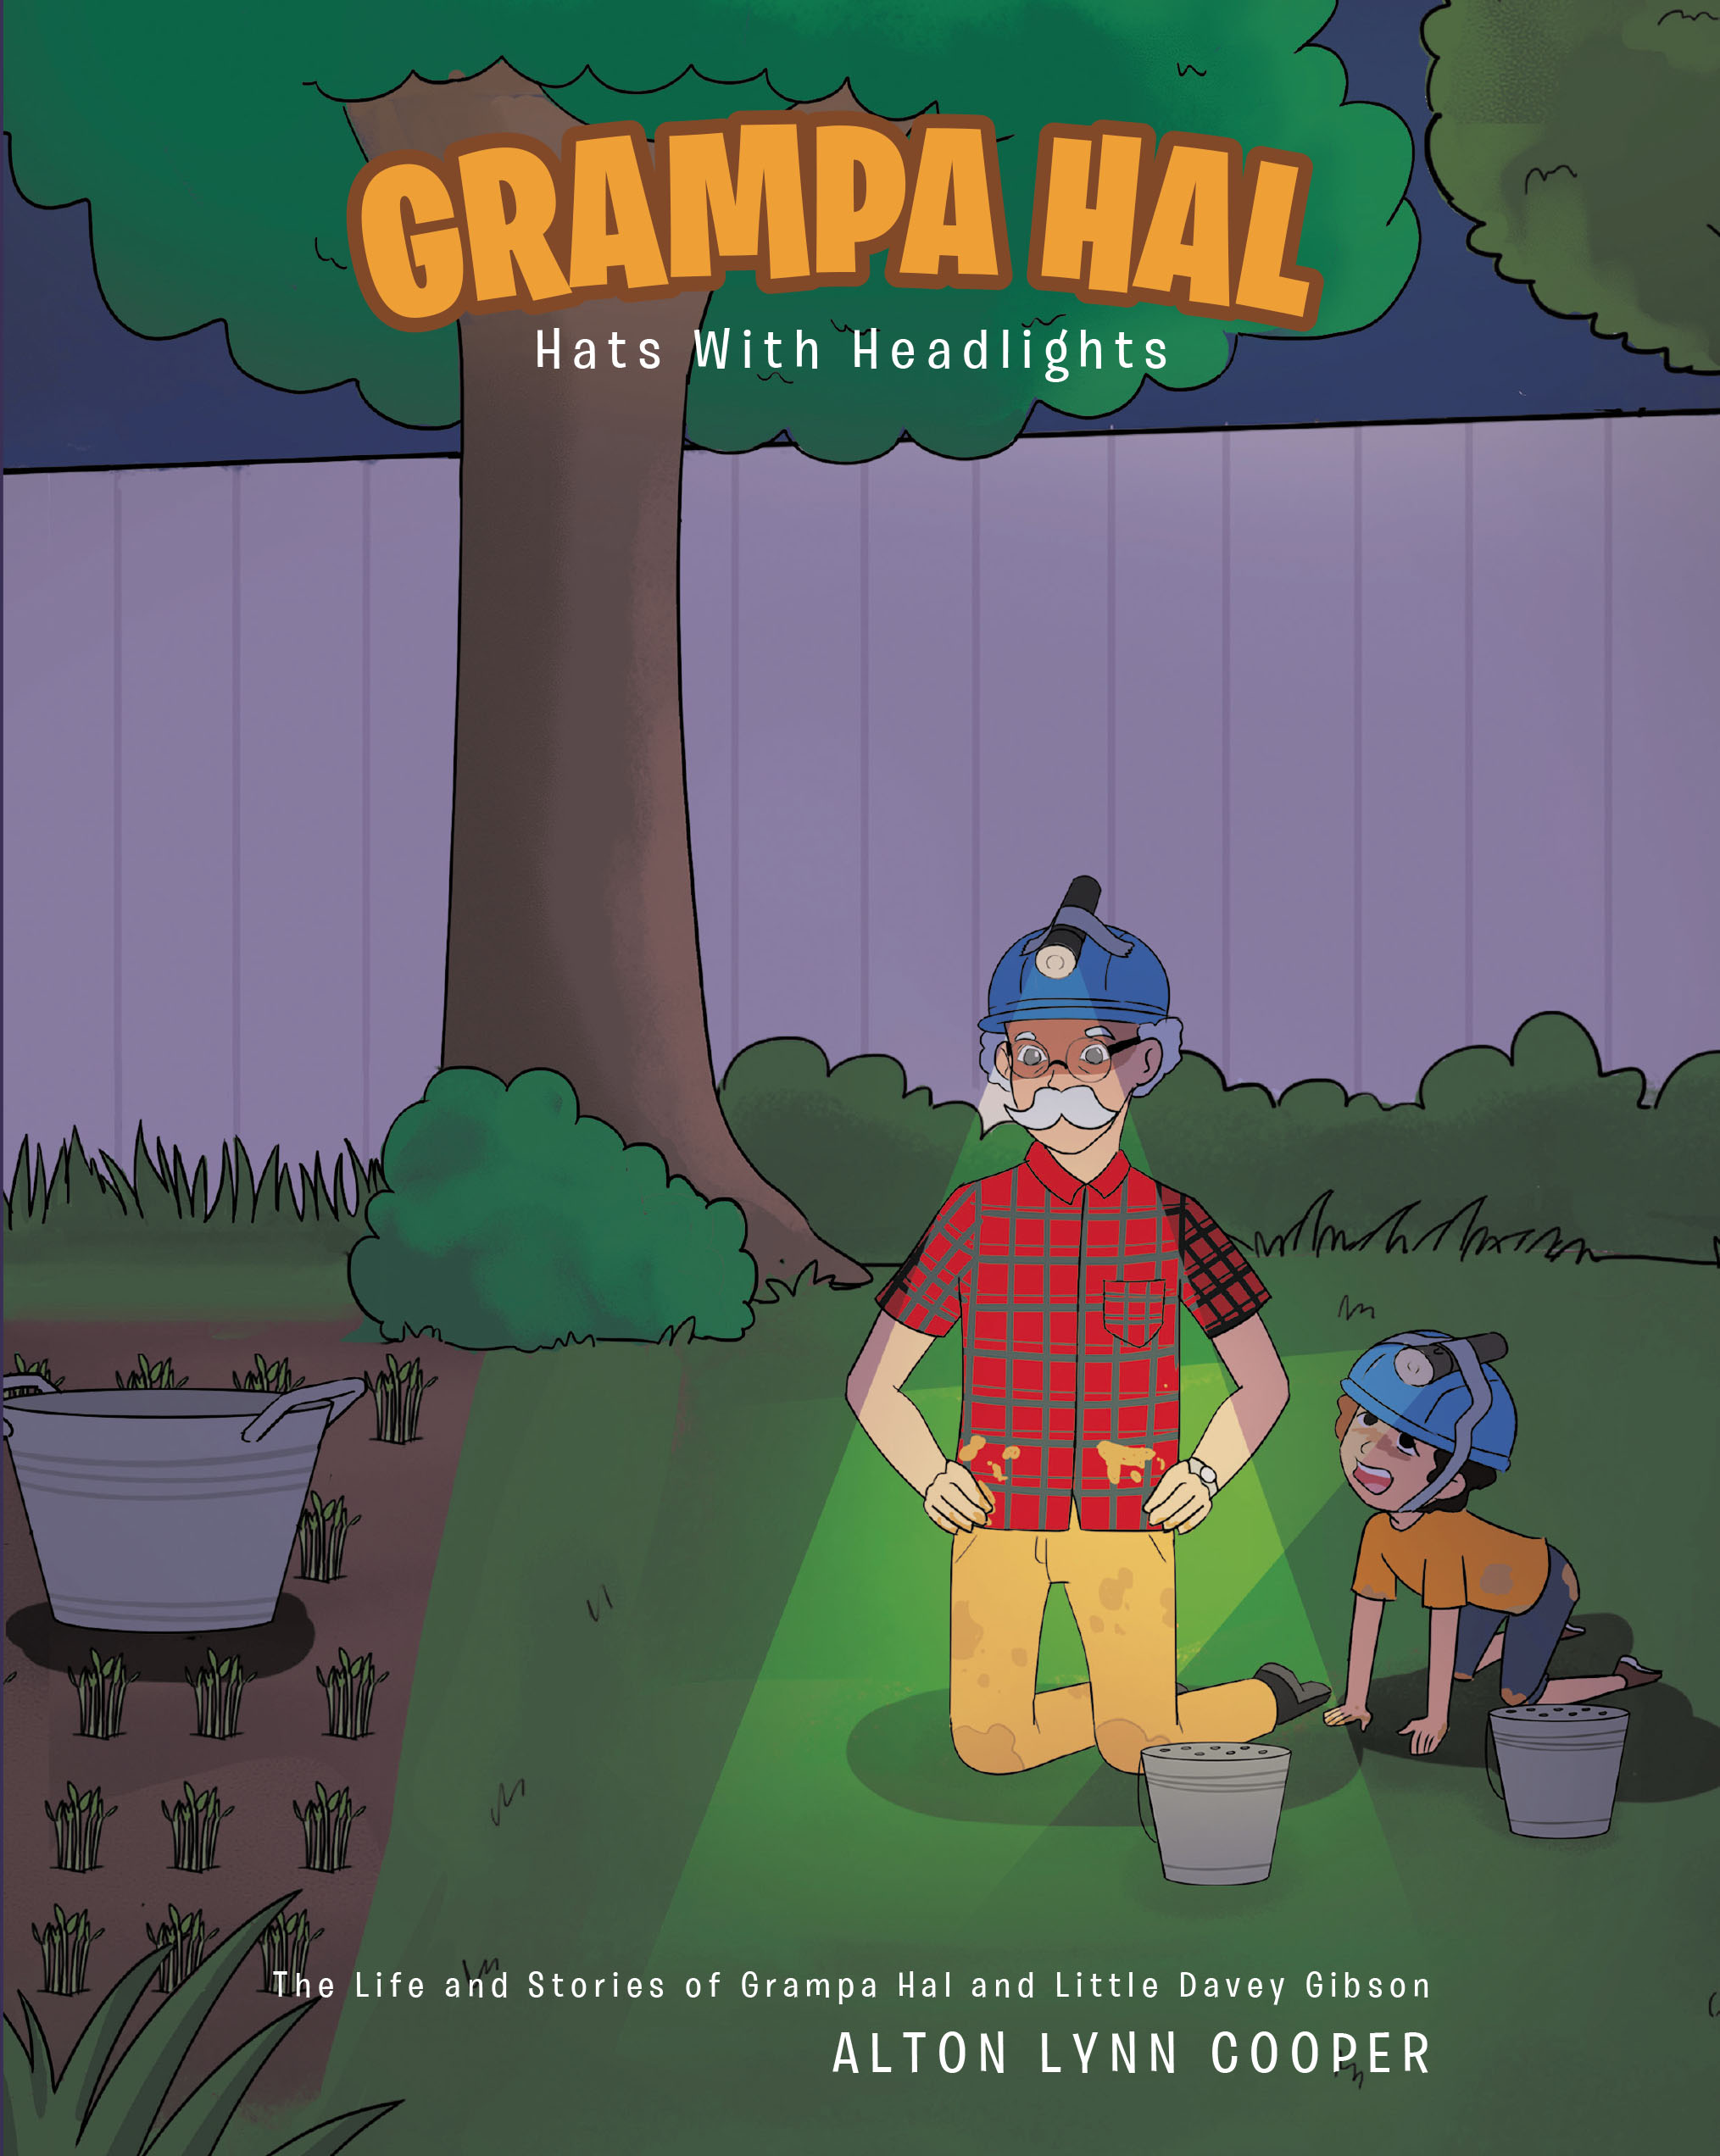 Alton Lynn Cooper’s Newly Released "Grampa Hal Hats with Headlights," is a Sweet Story of Adventure Between a Young Boy and a Doting Grandfather